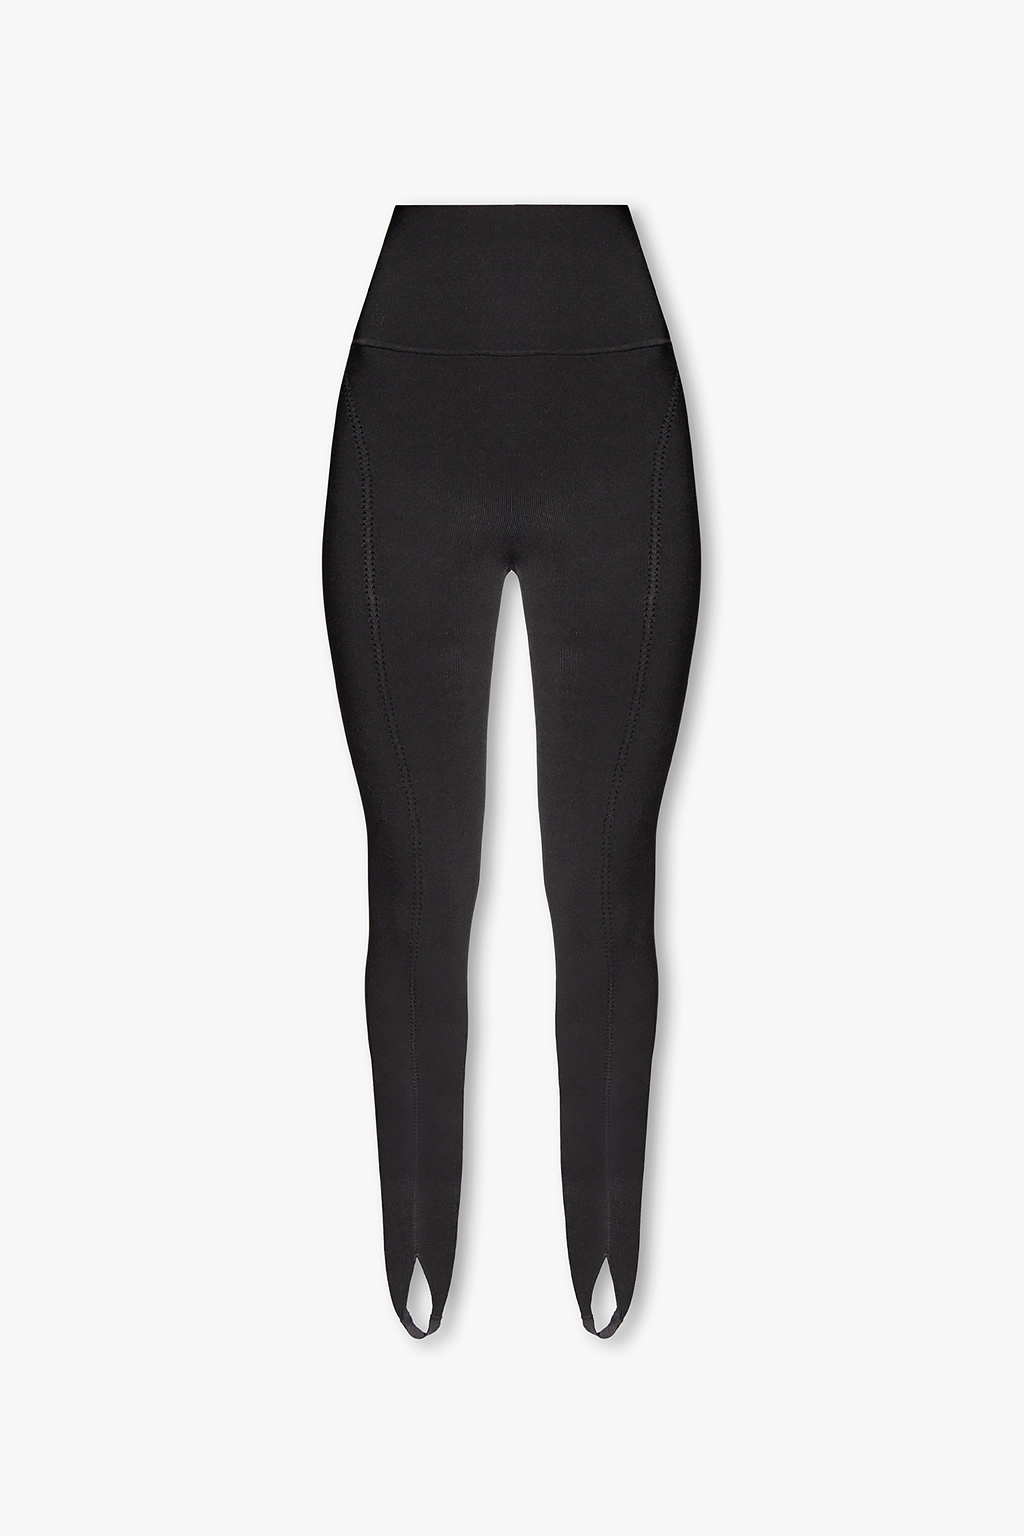 Daisy Street Active ruched leggings in black